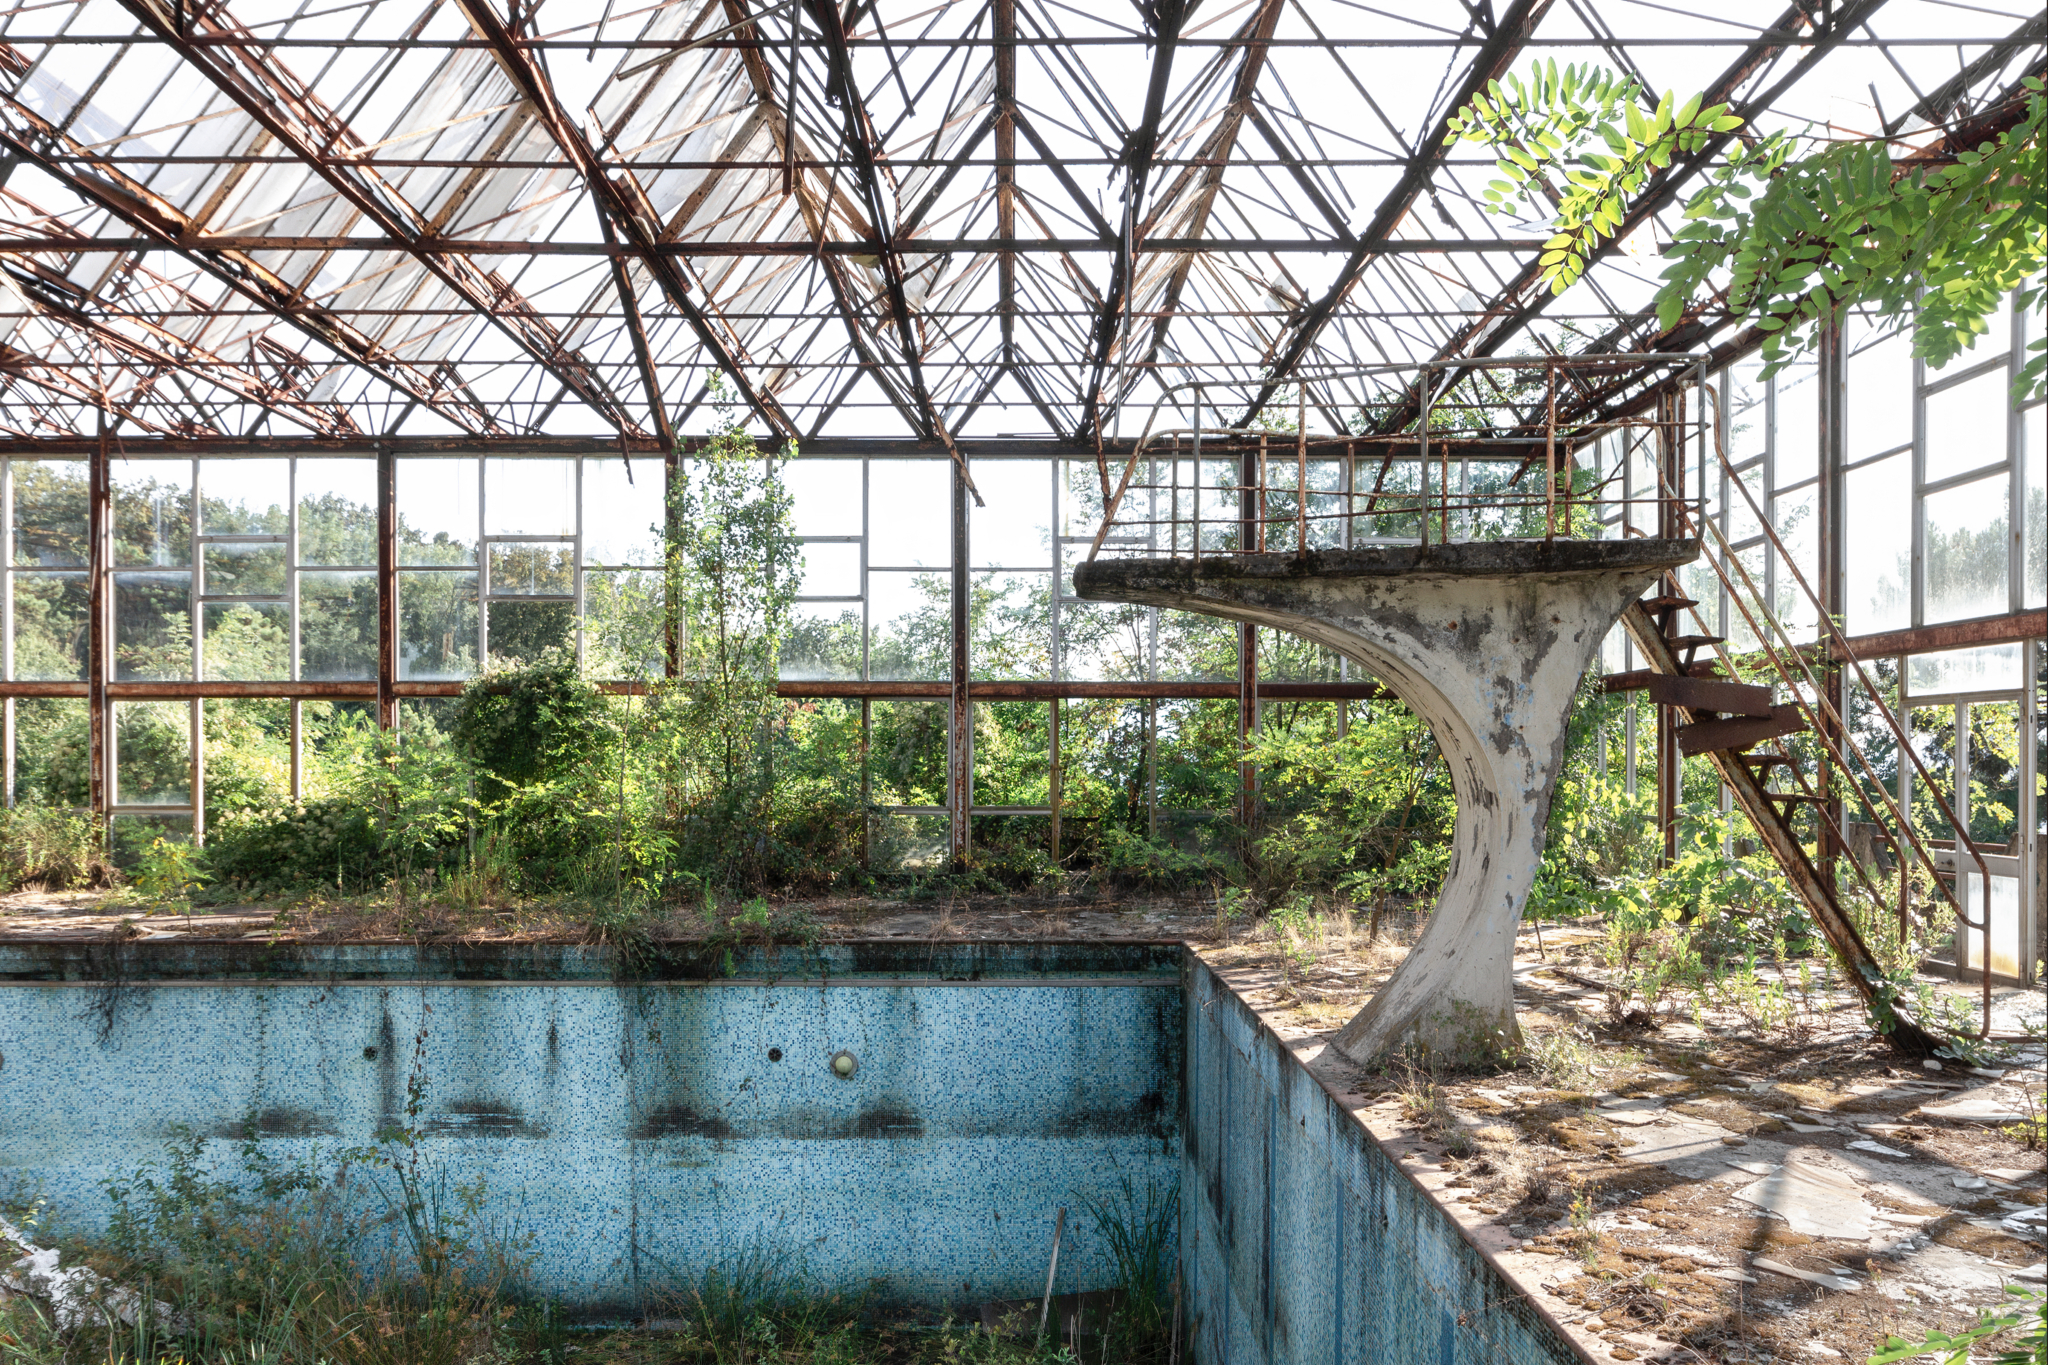 Forestale - Abandoned pool with nature reclaim, Italy